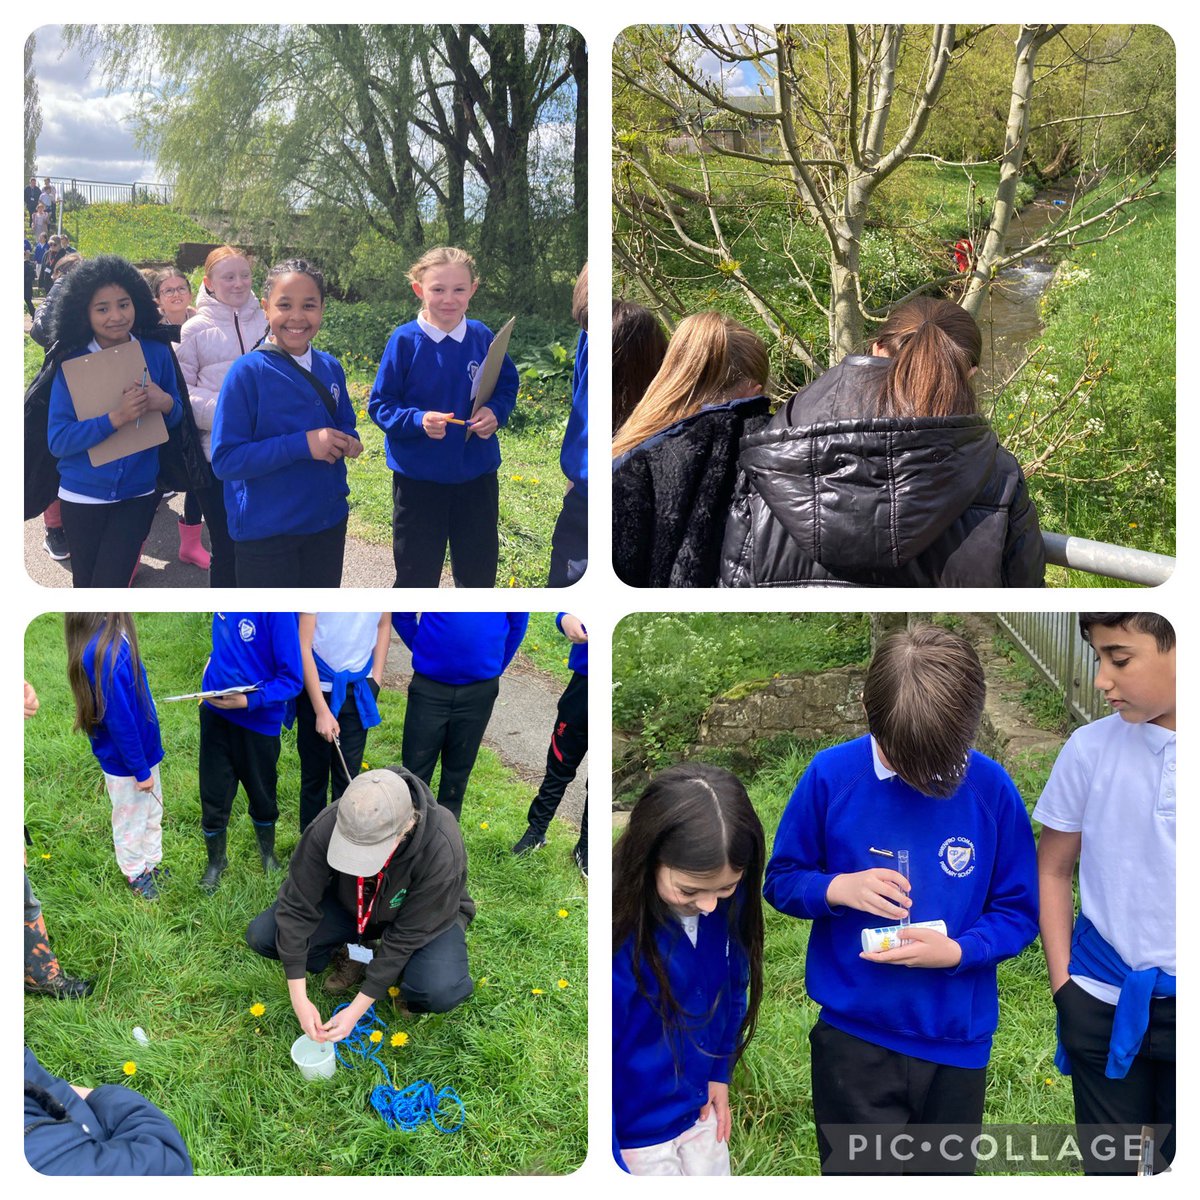 Dosbarth Beaumaris had a fantastic session with @GwkNorthWales, looking at the pollution in the River Gwenfro, testing the water cleanliness, and learning how to keep it clean and healthy. Diolch! @wrexhamcbc #TeamGwenfro #ethicalinformedcitizens #localarealearning